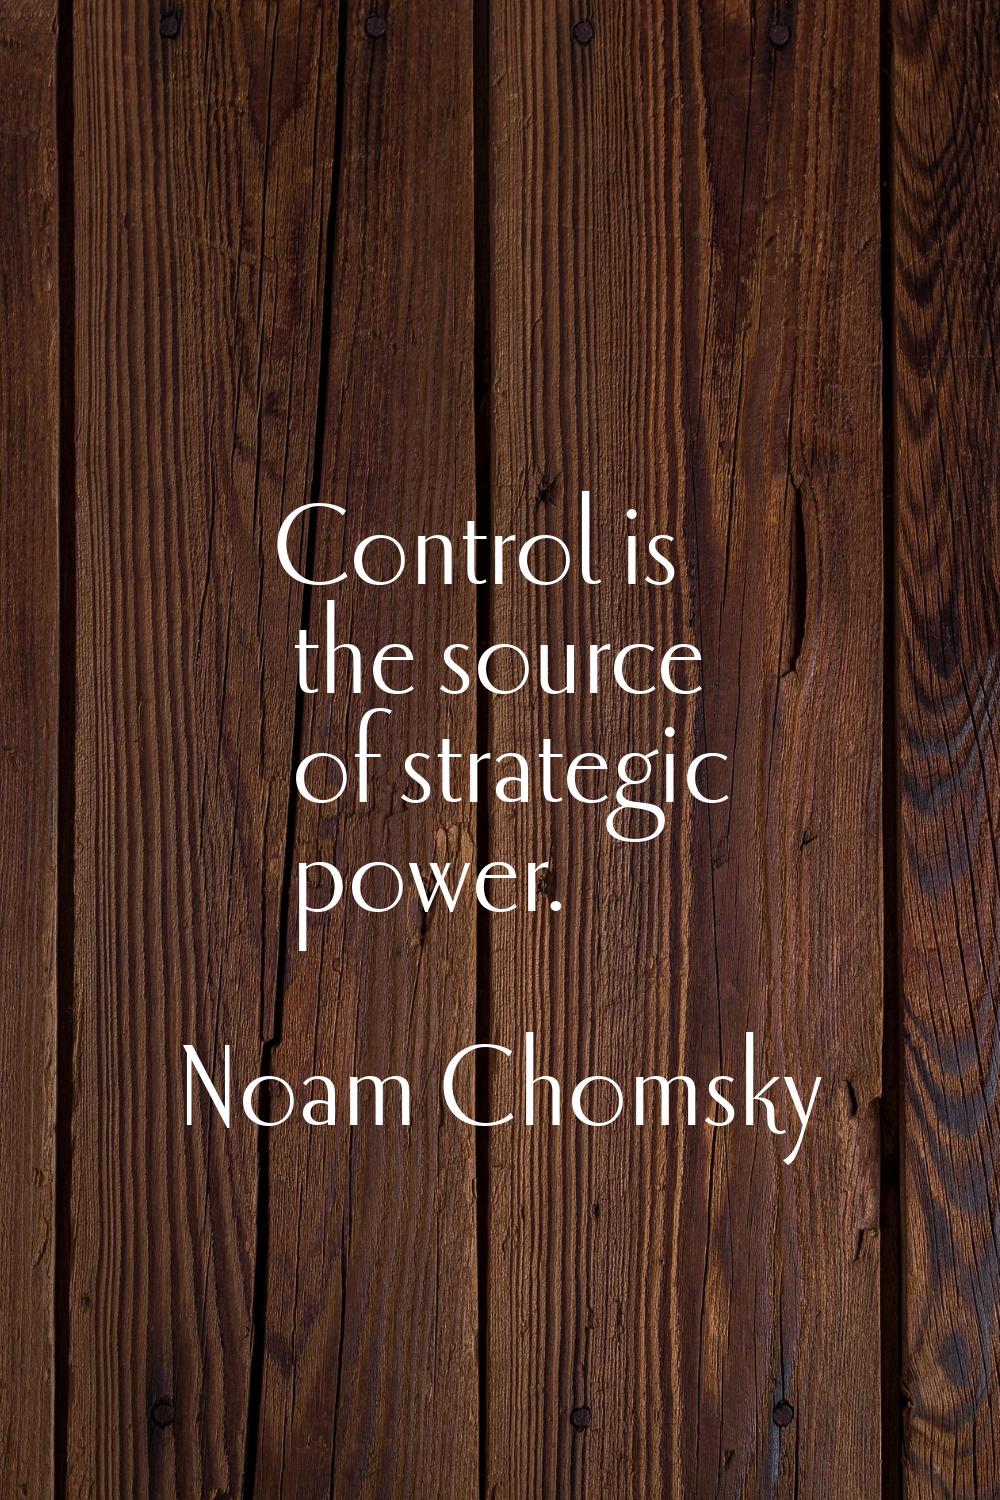 Control is the source of strategic power.